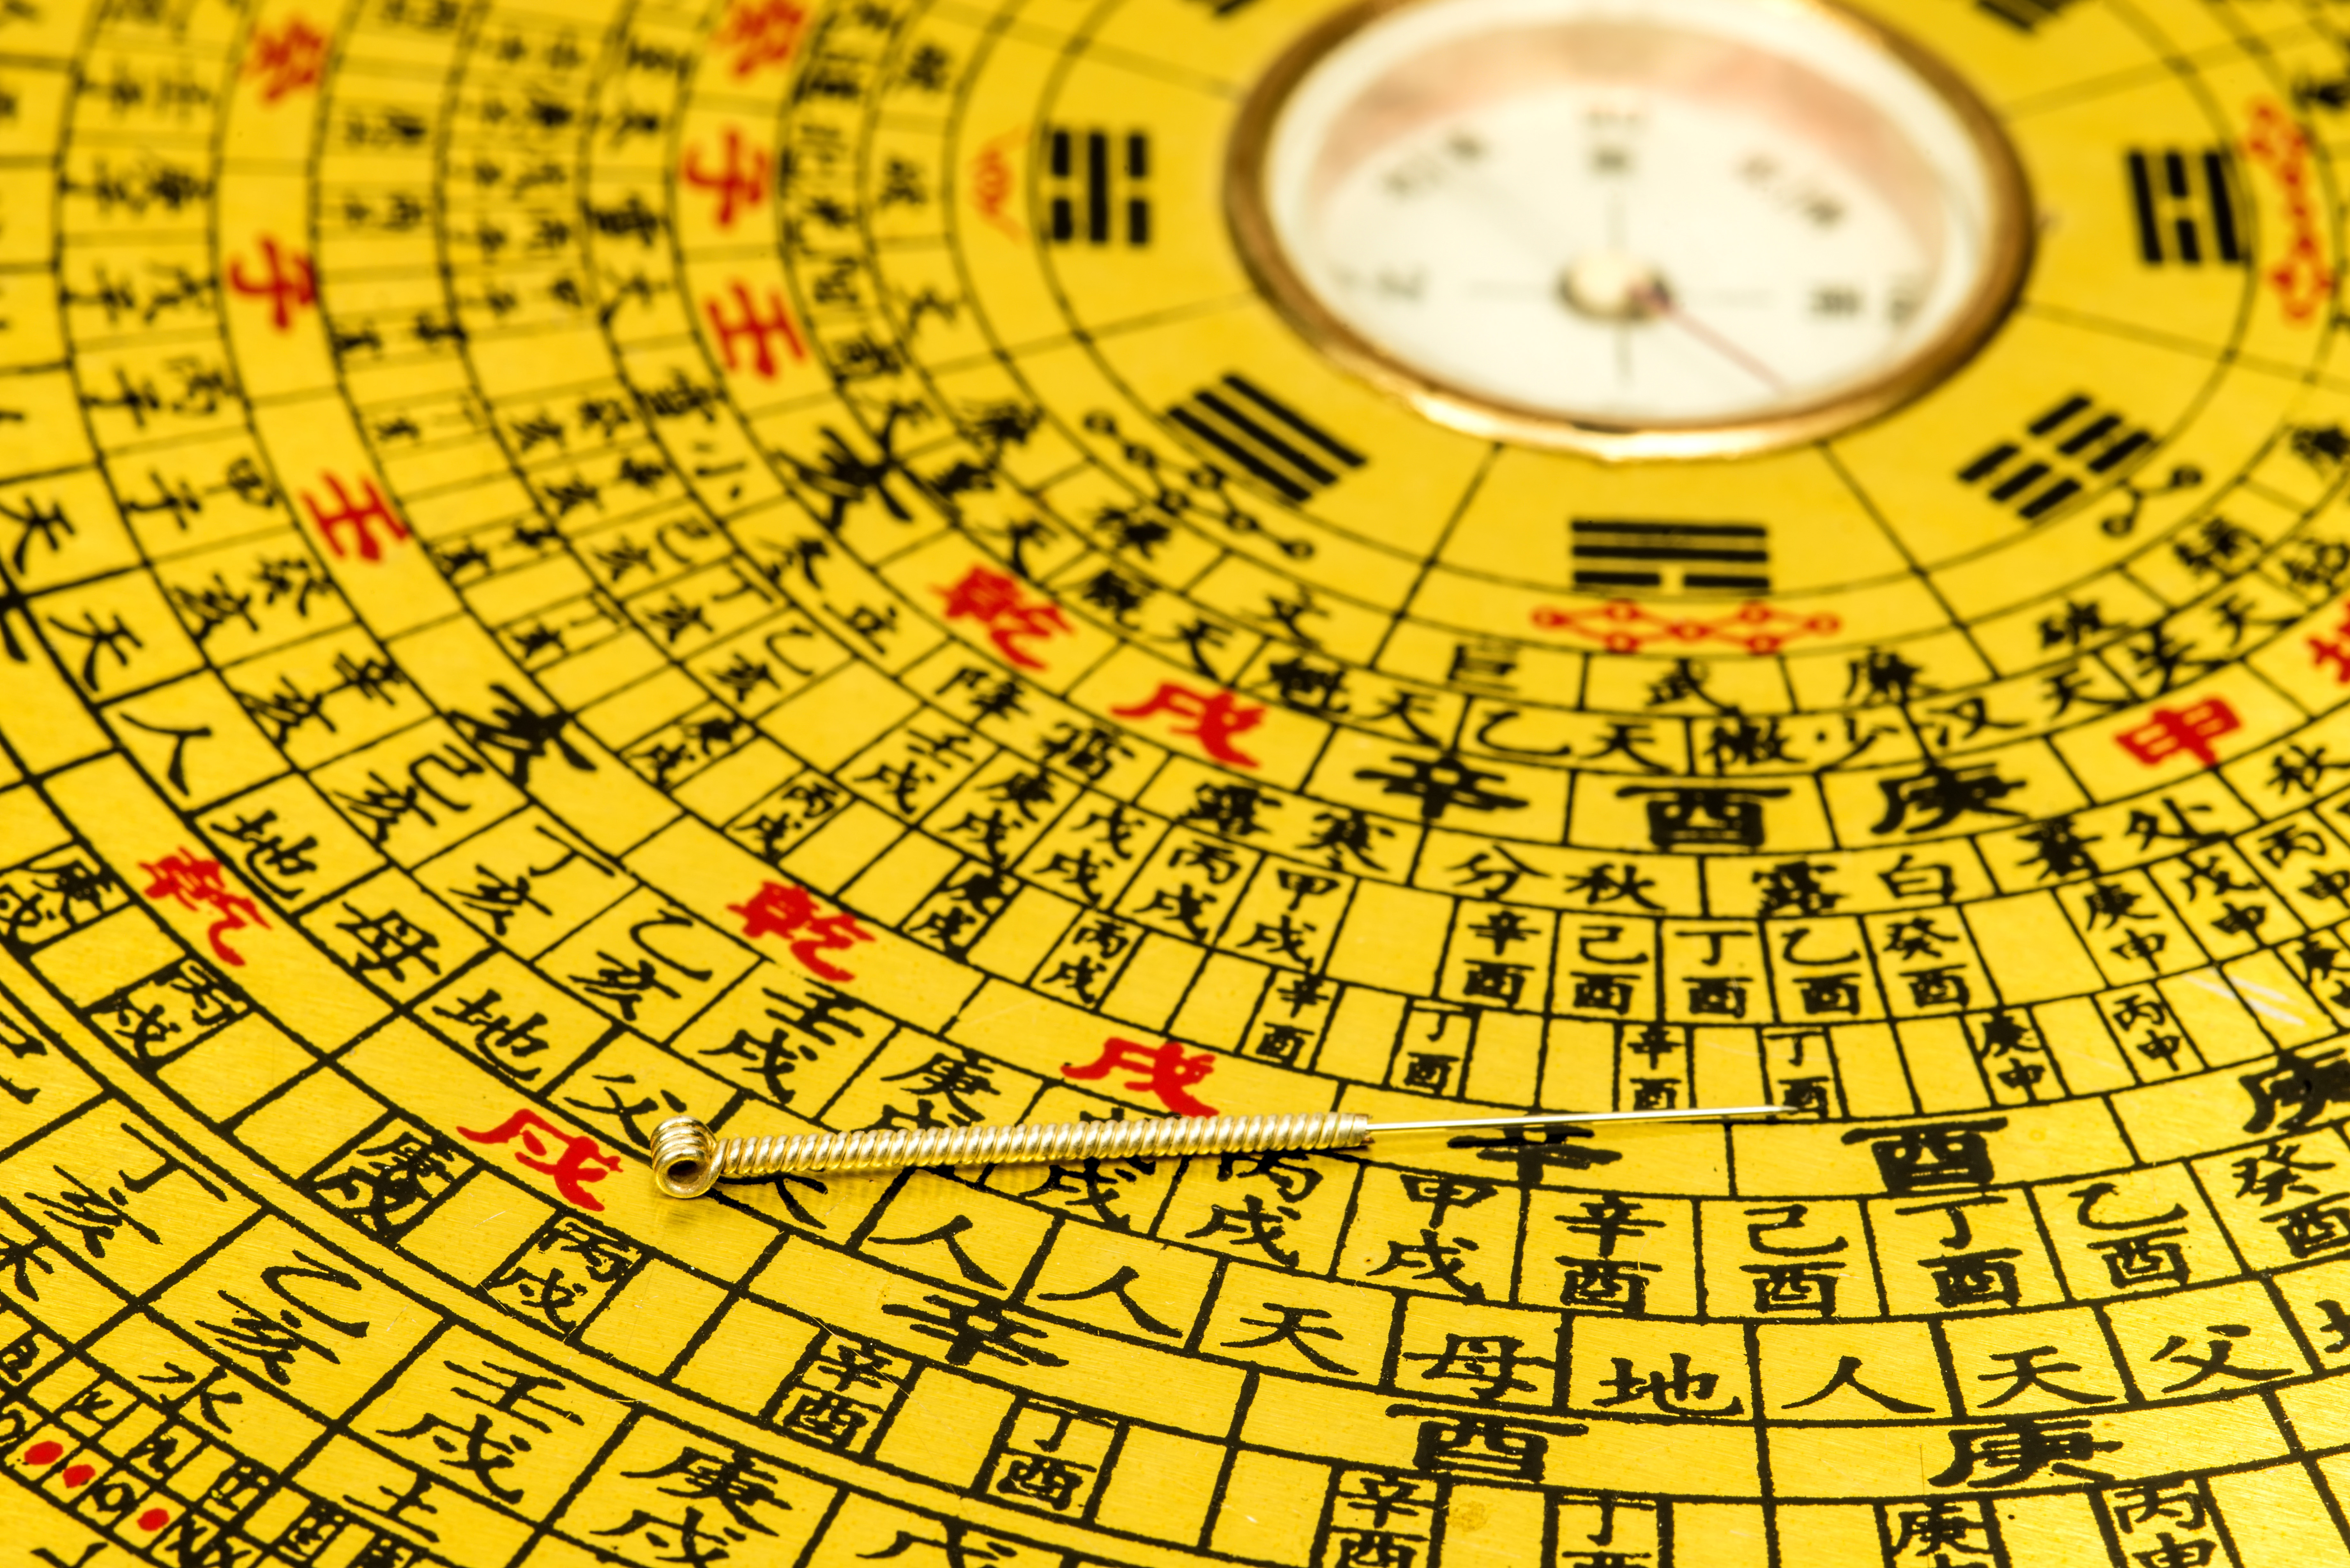 Acupuncture needle on chinese feng shui compass